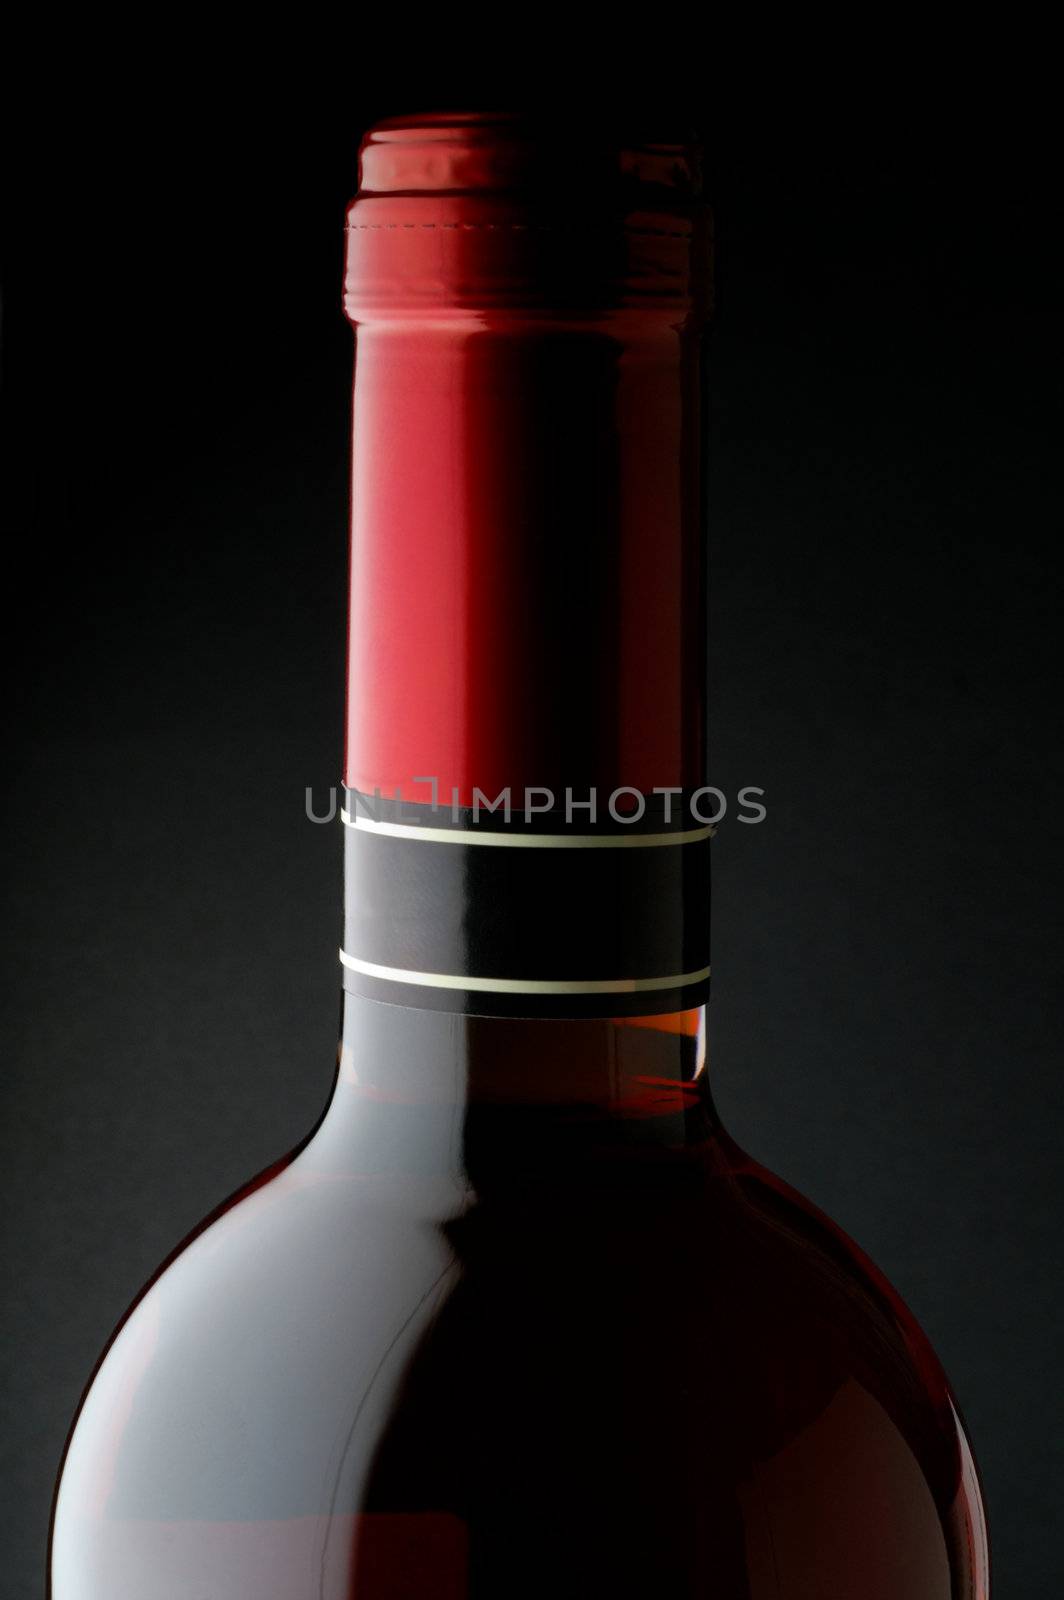 Red wine bottle closeup with red capsule and black background
